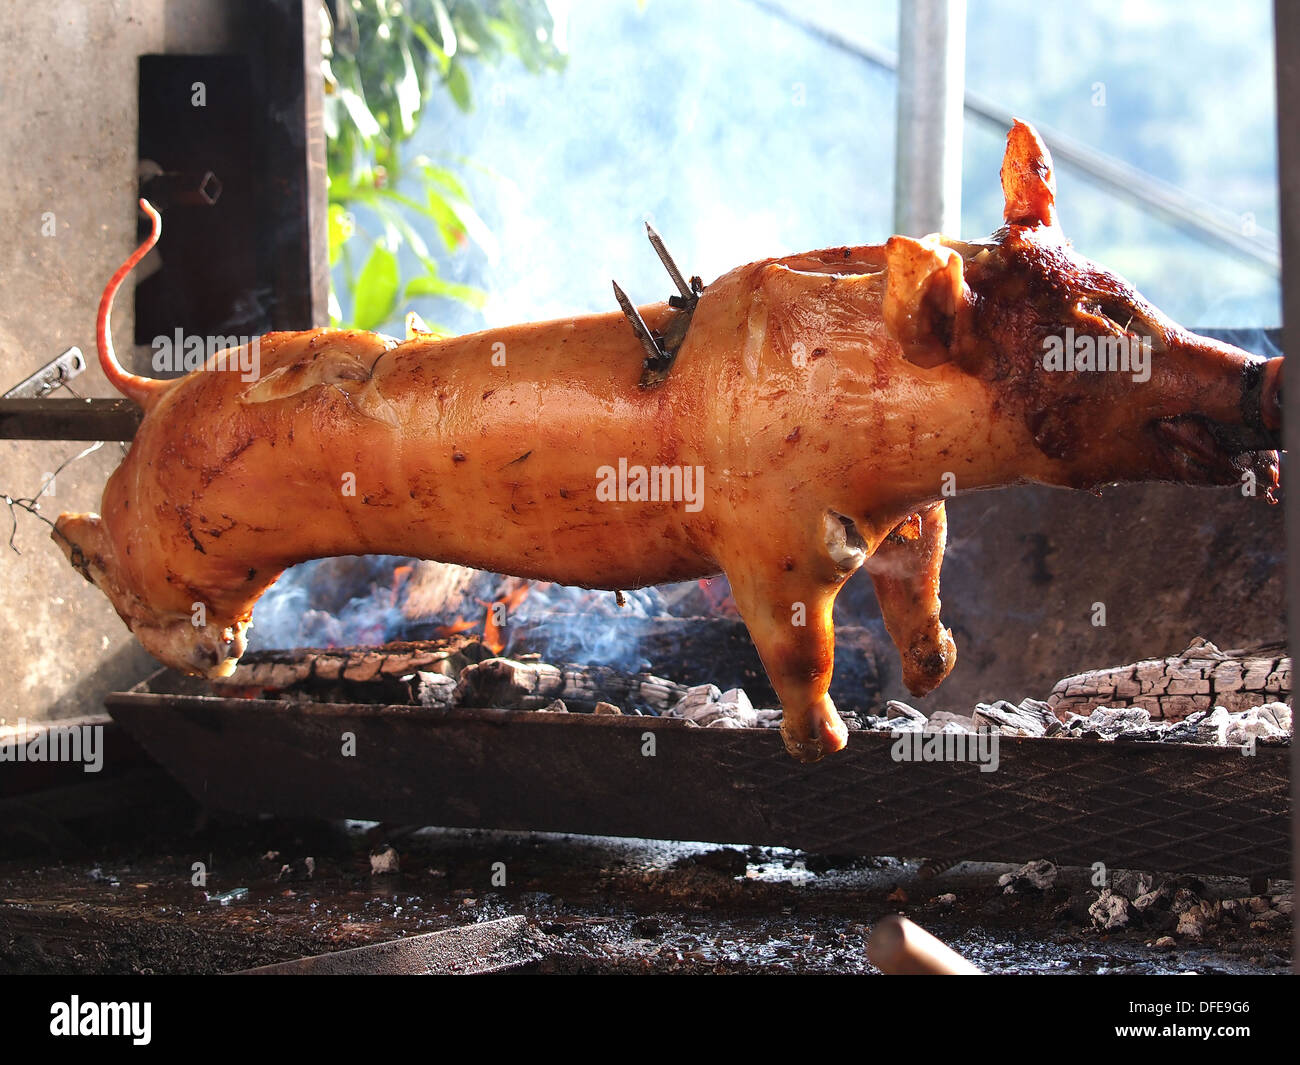 grilled pig on the fire Stock Photo